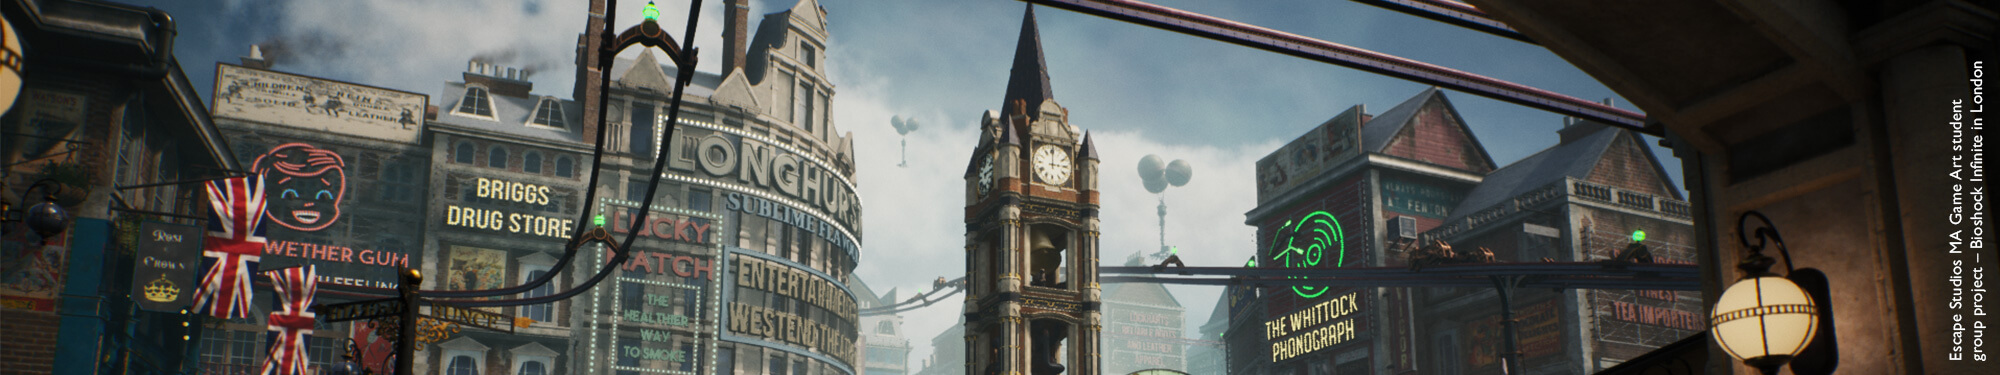 London scene created by Escape students